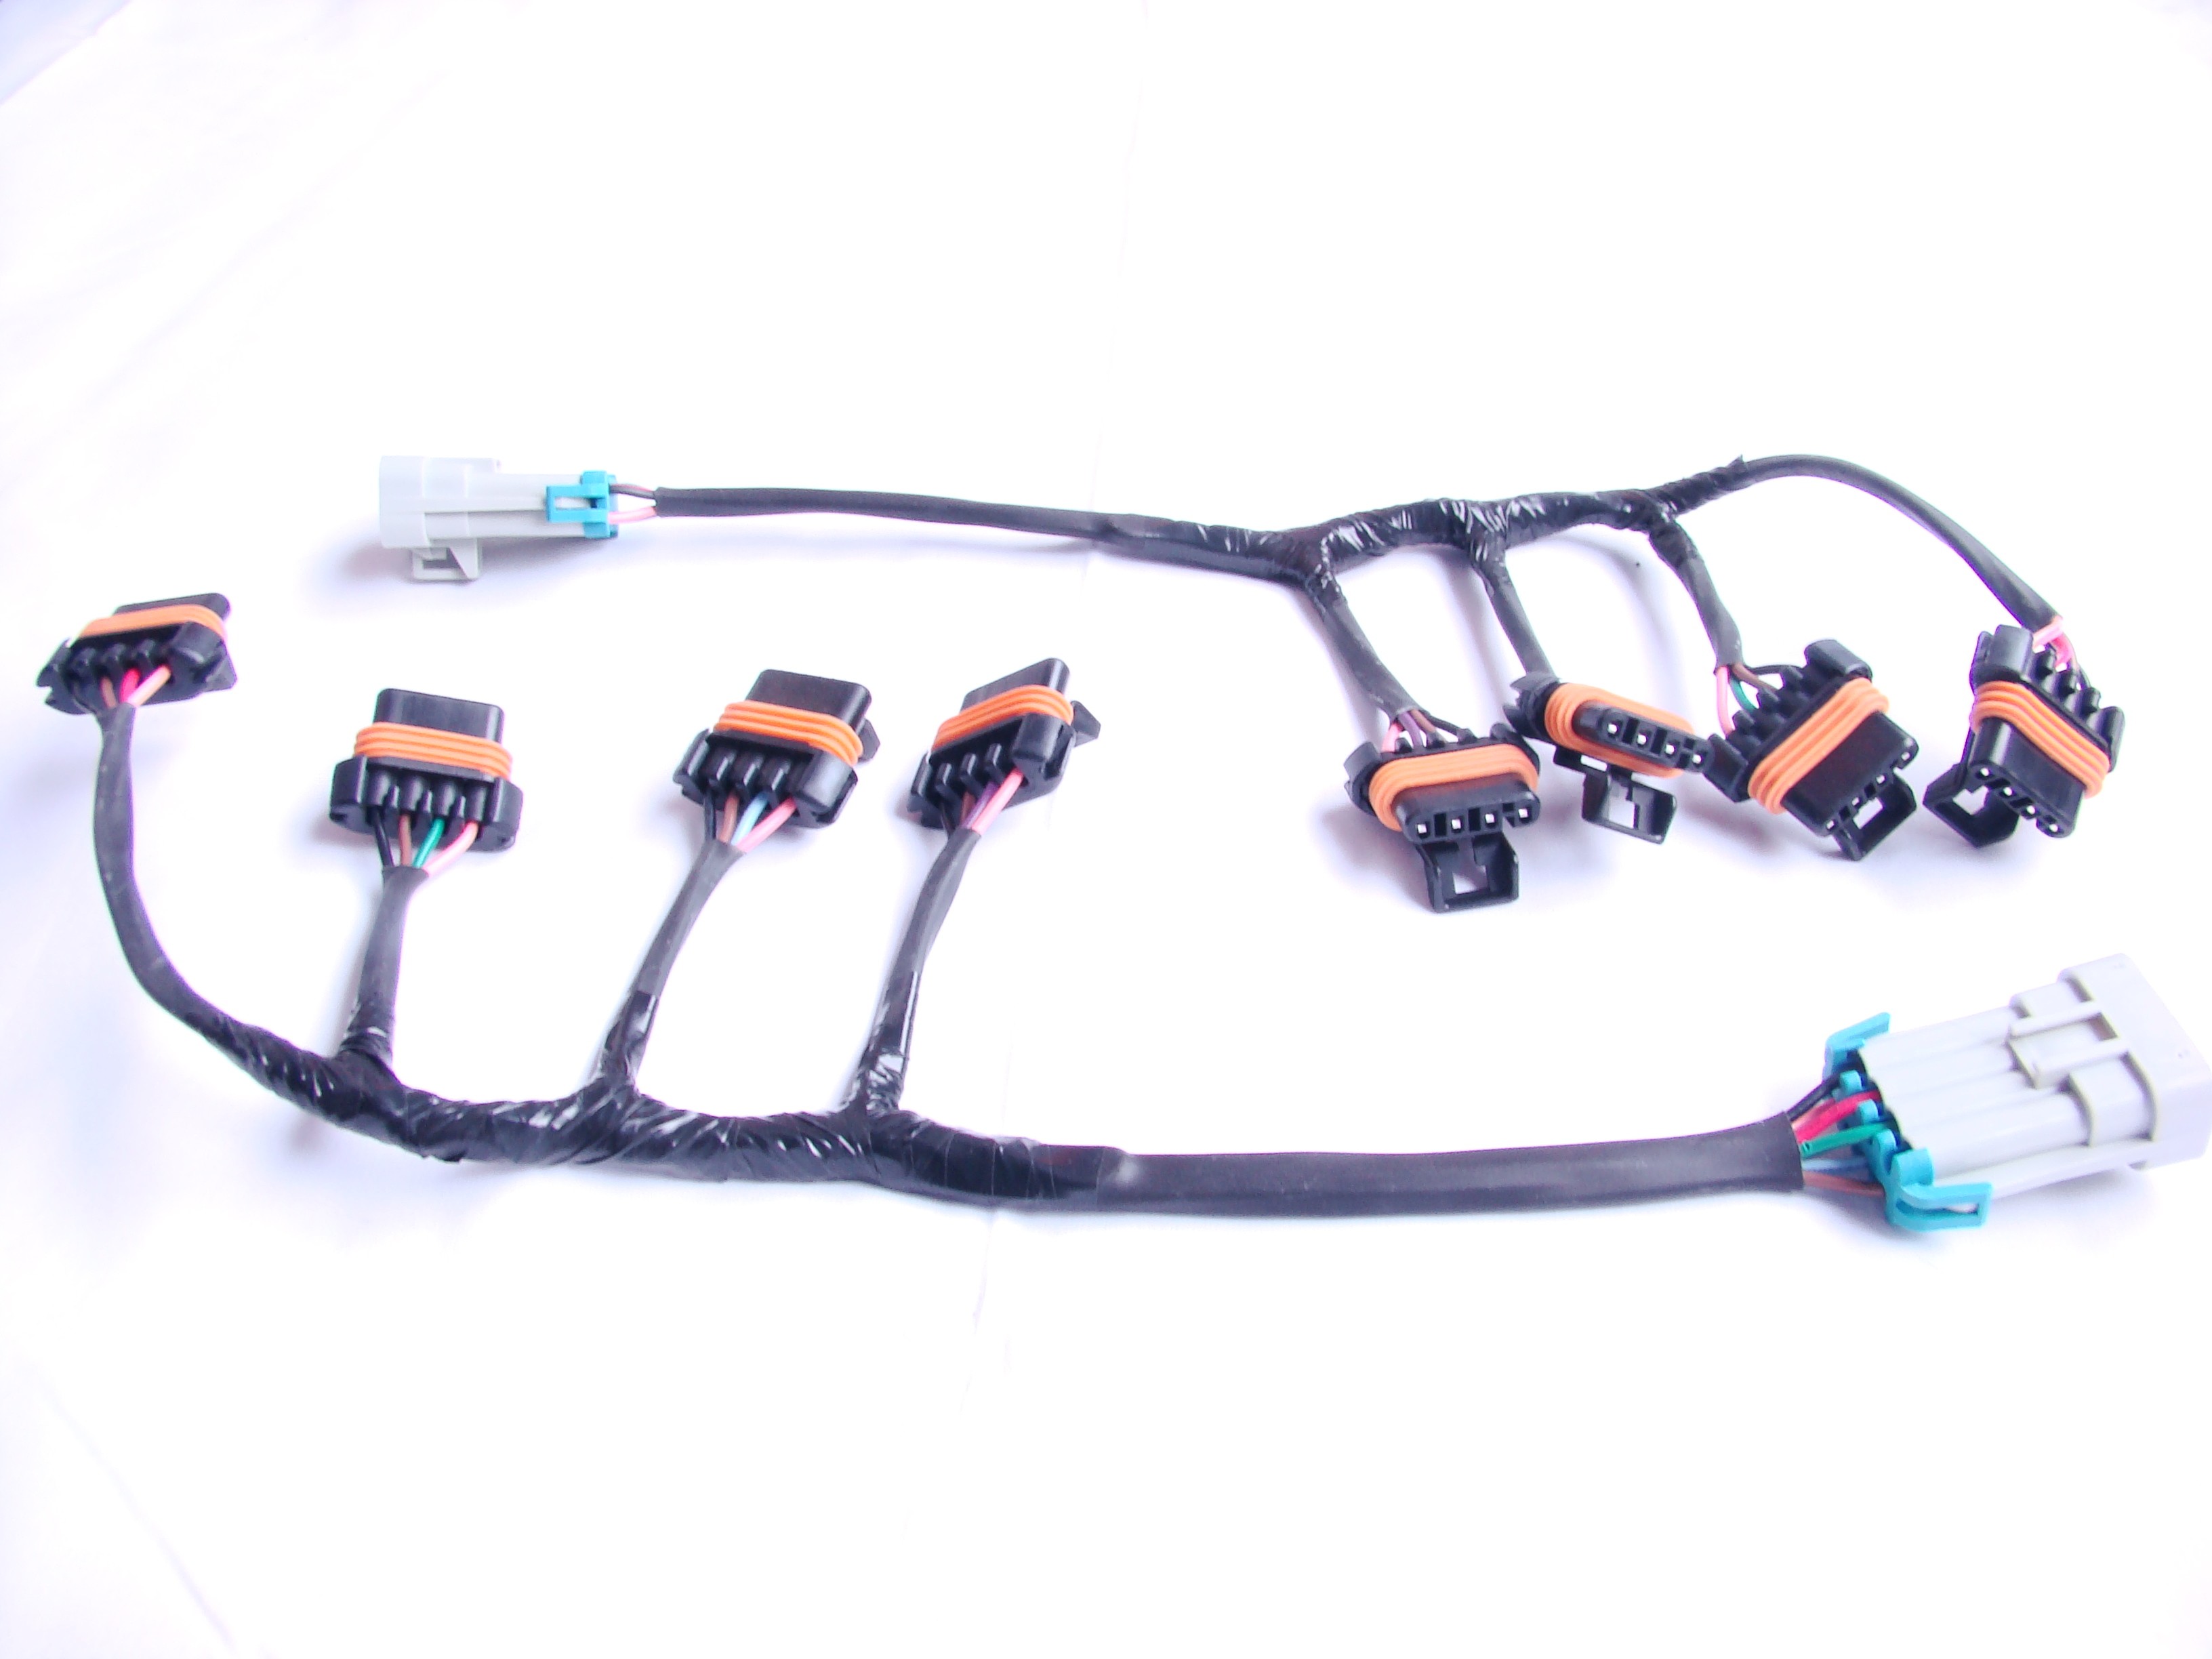 On 3 Performance LSX Coil Relocation Sub Harness – LS1 ... wiring harness ls3 